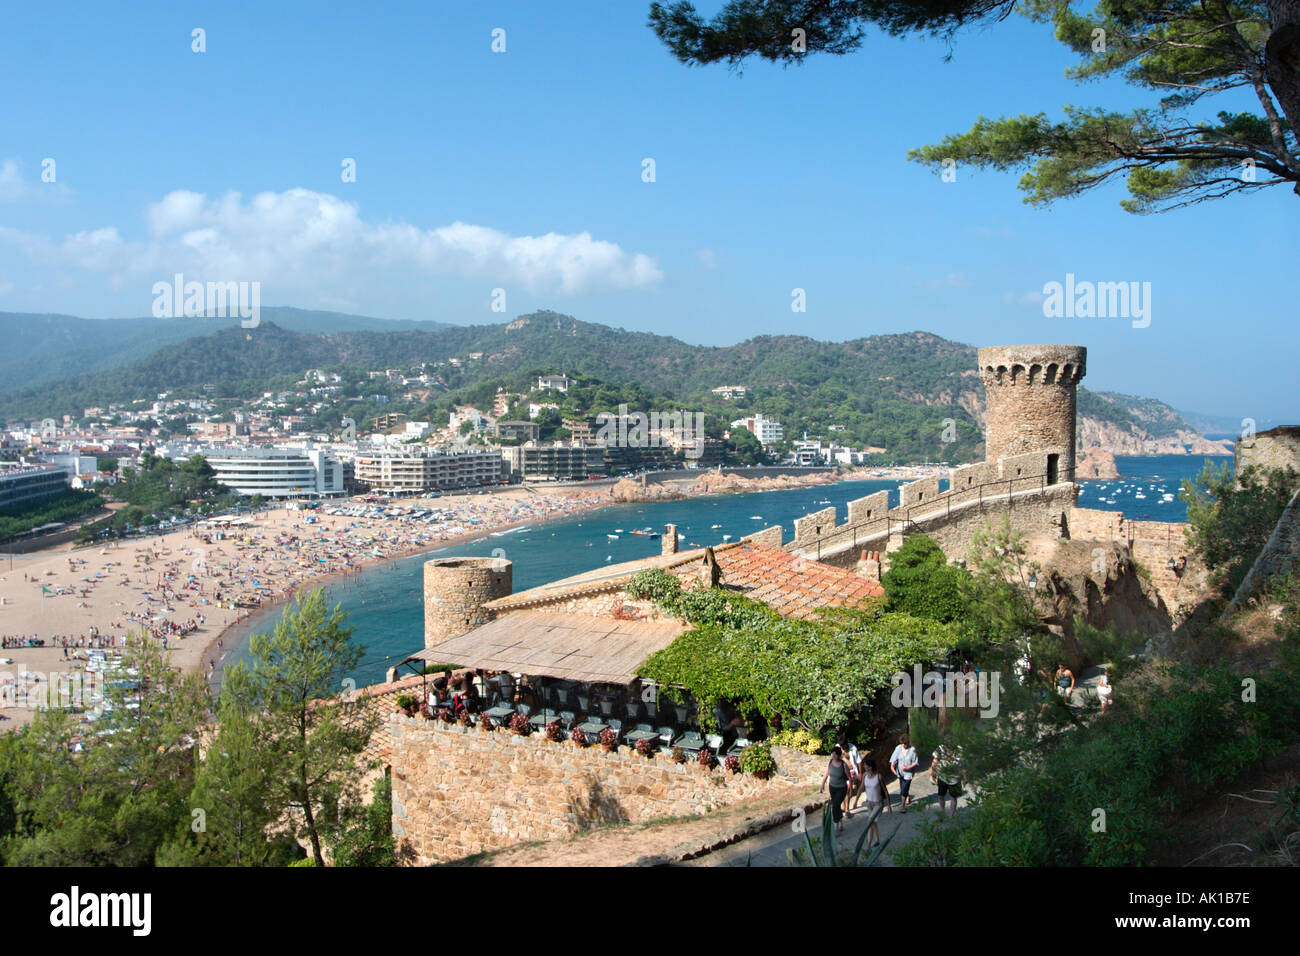 View from the Castle with a restaurant terrace in the foreground, Tossa de Mar, Costa Brava, Catalunya, Spain Stock Photo